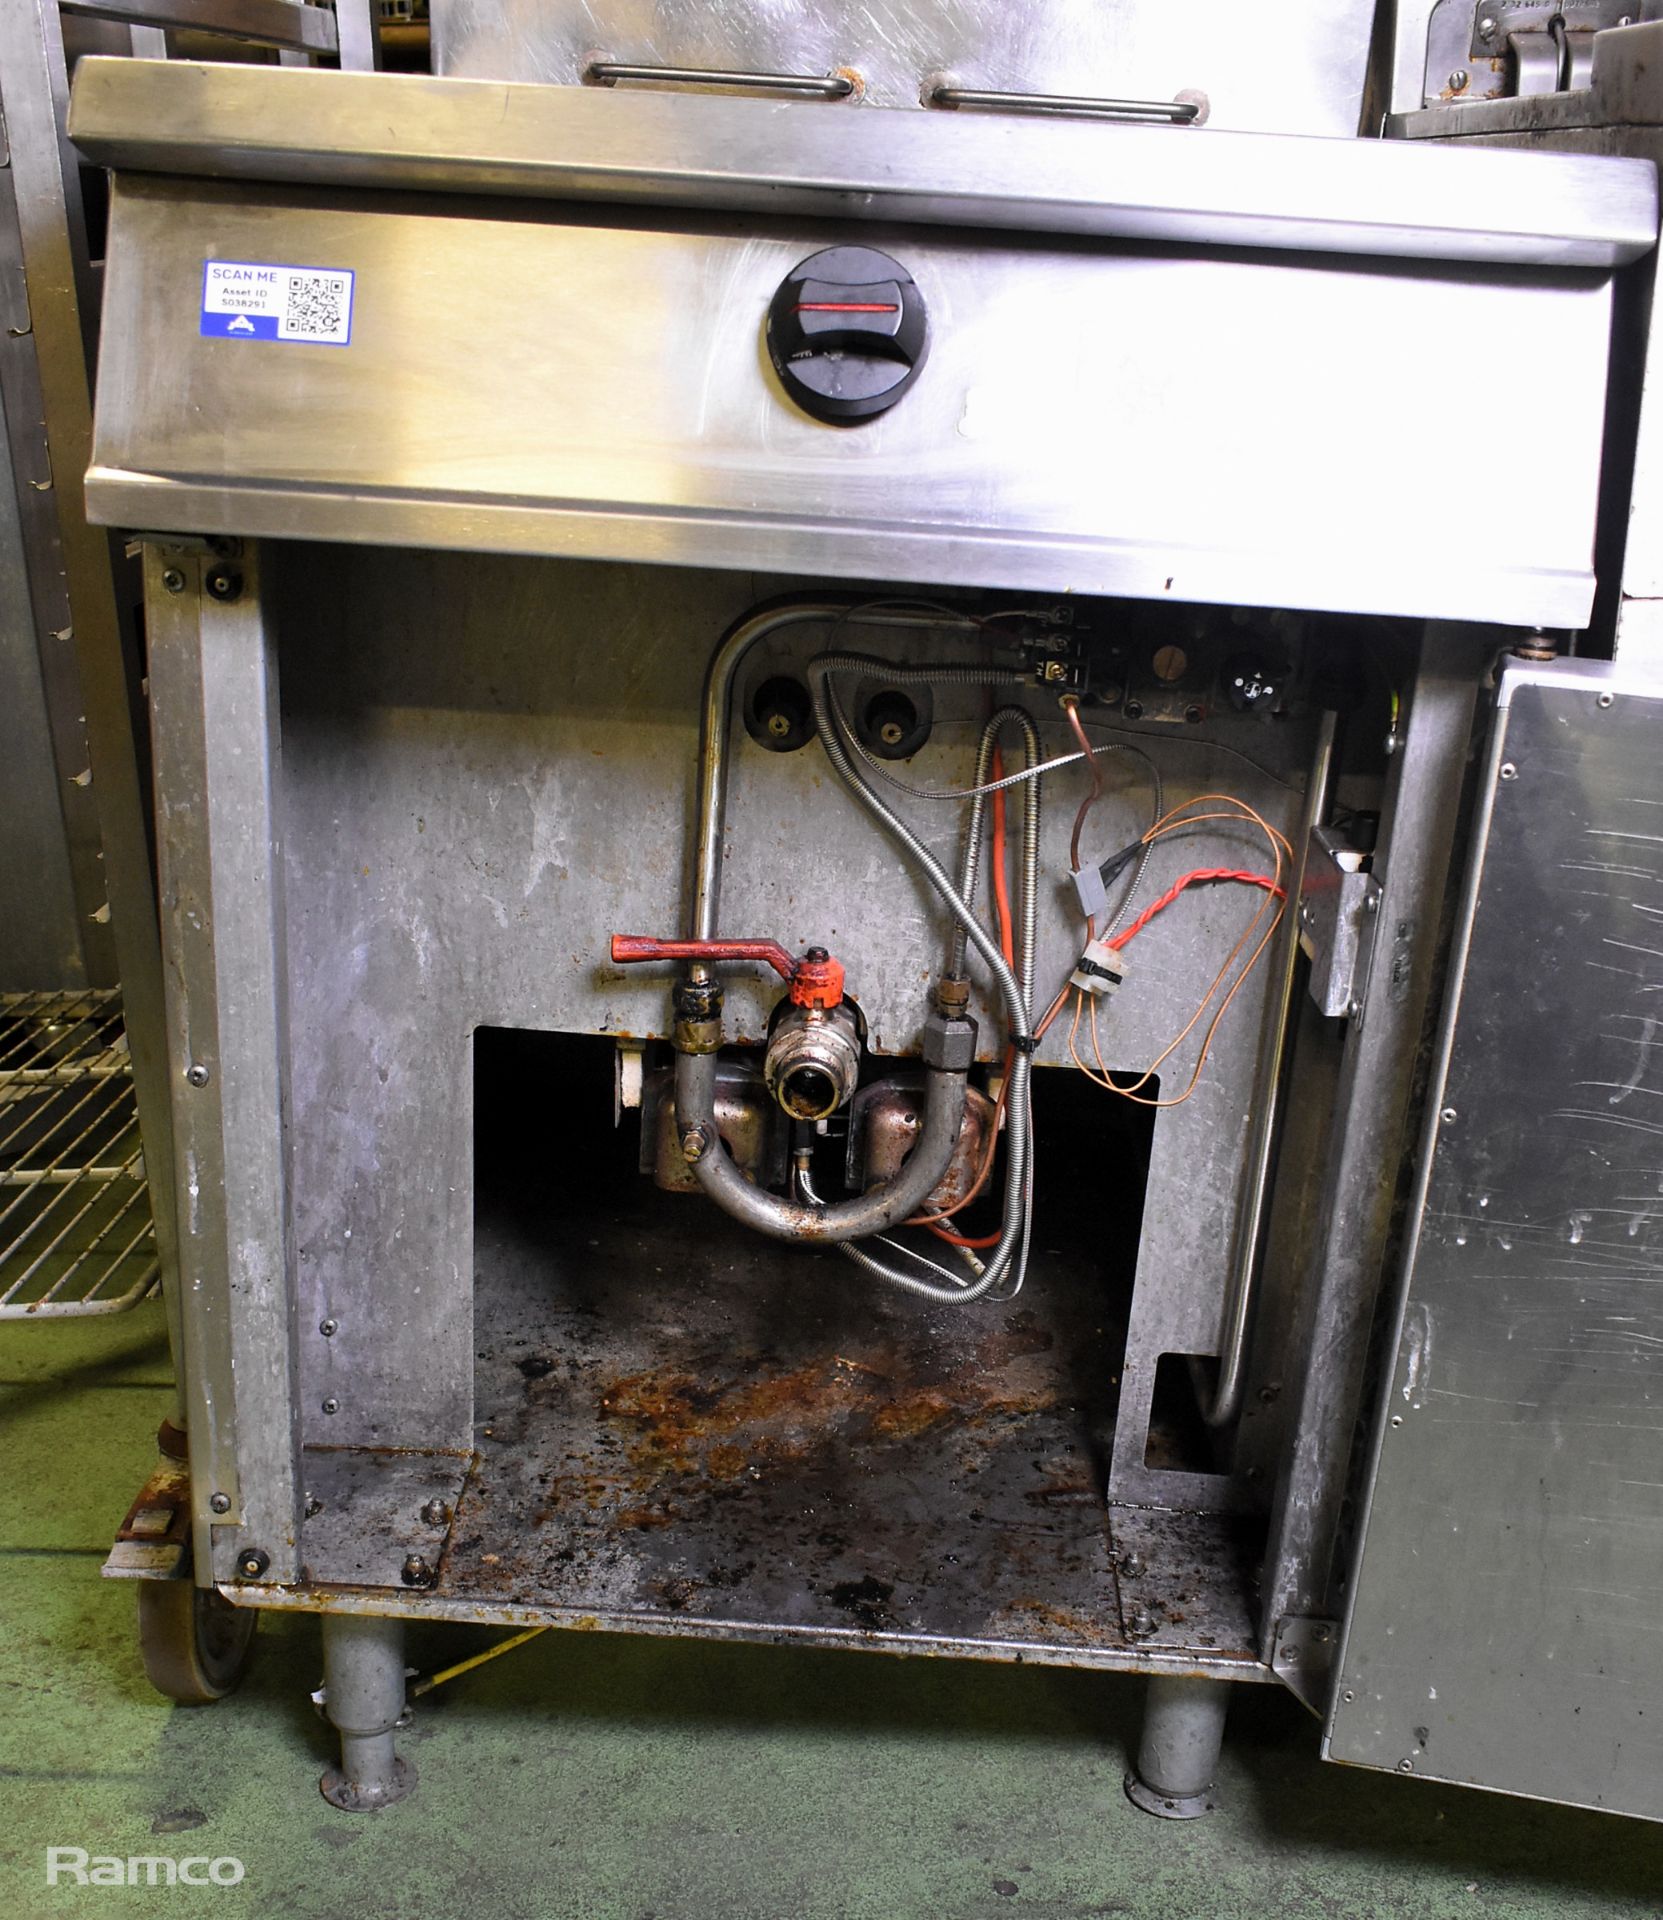 Falcon Dominator G2860 stainless steel single tank gas fryer - W 600 x D 1000 x H 1100mm - Image 3 of 5